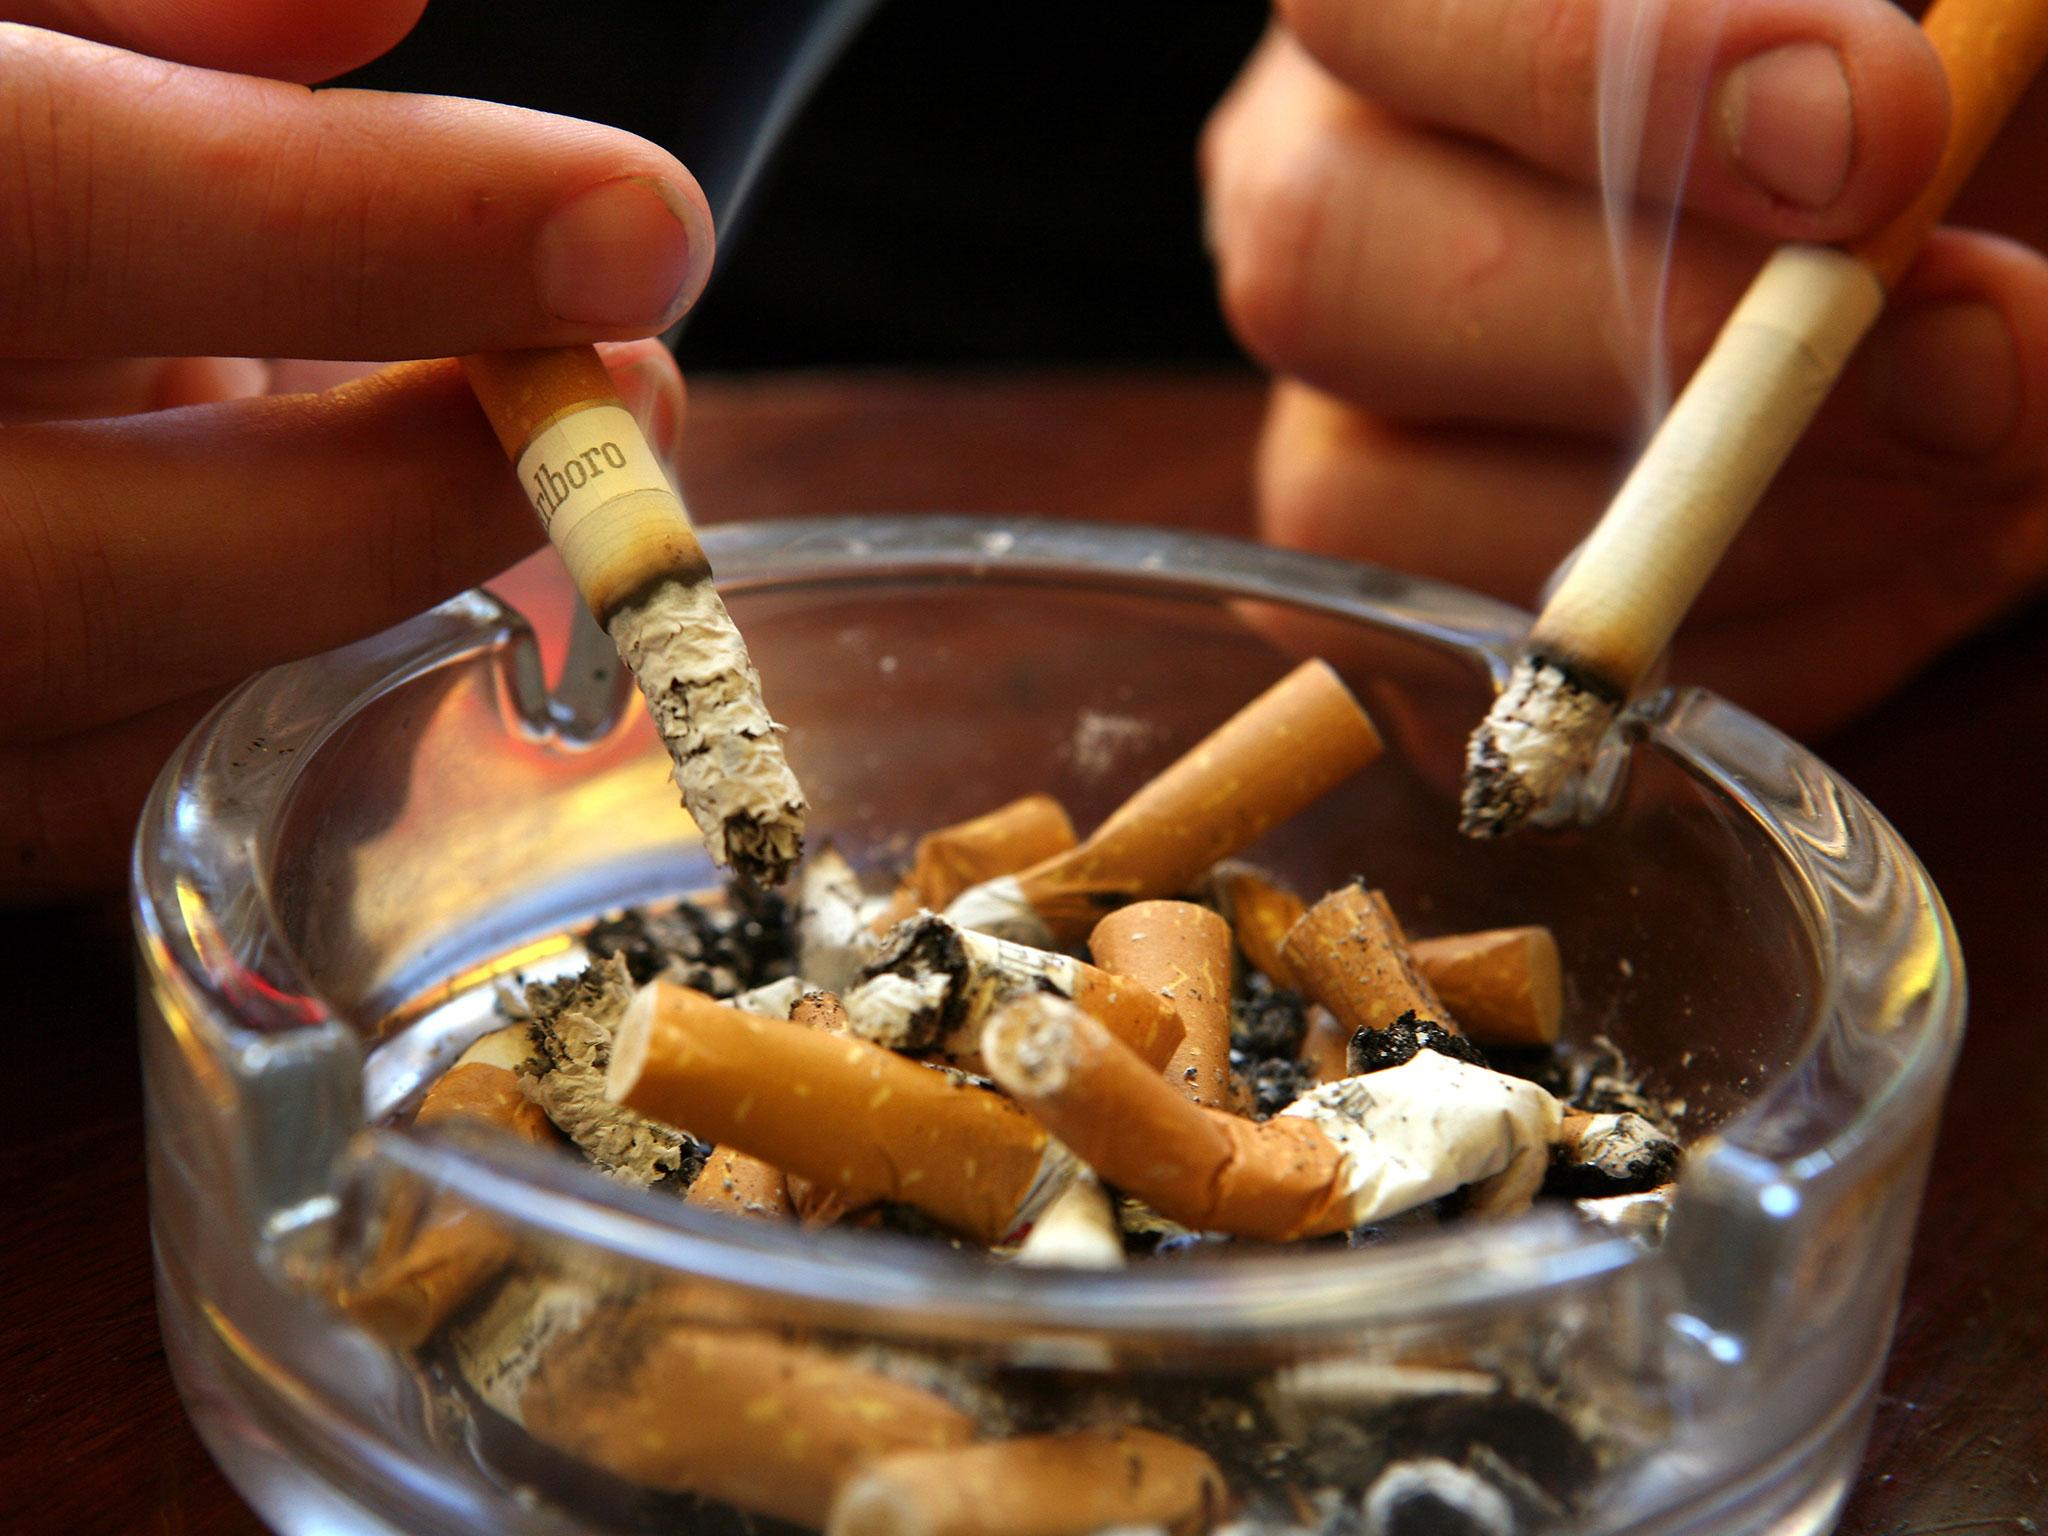 Nicotine, the main addictive ingredient in tobacco, is considered the world's third most addictive drug